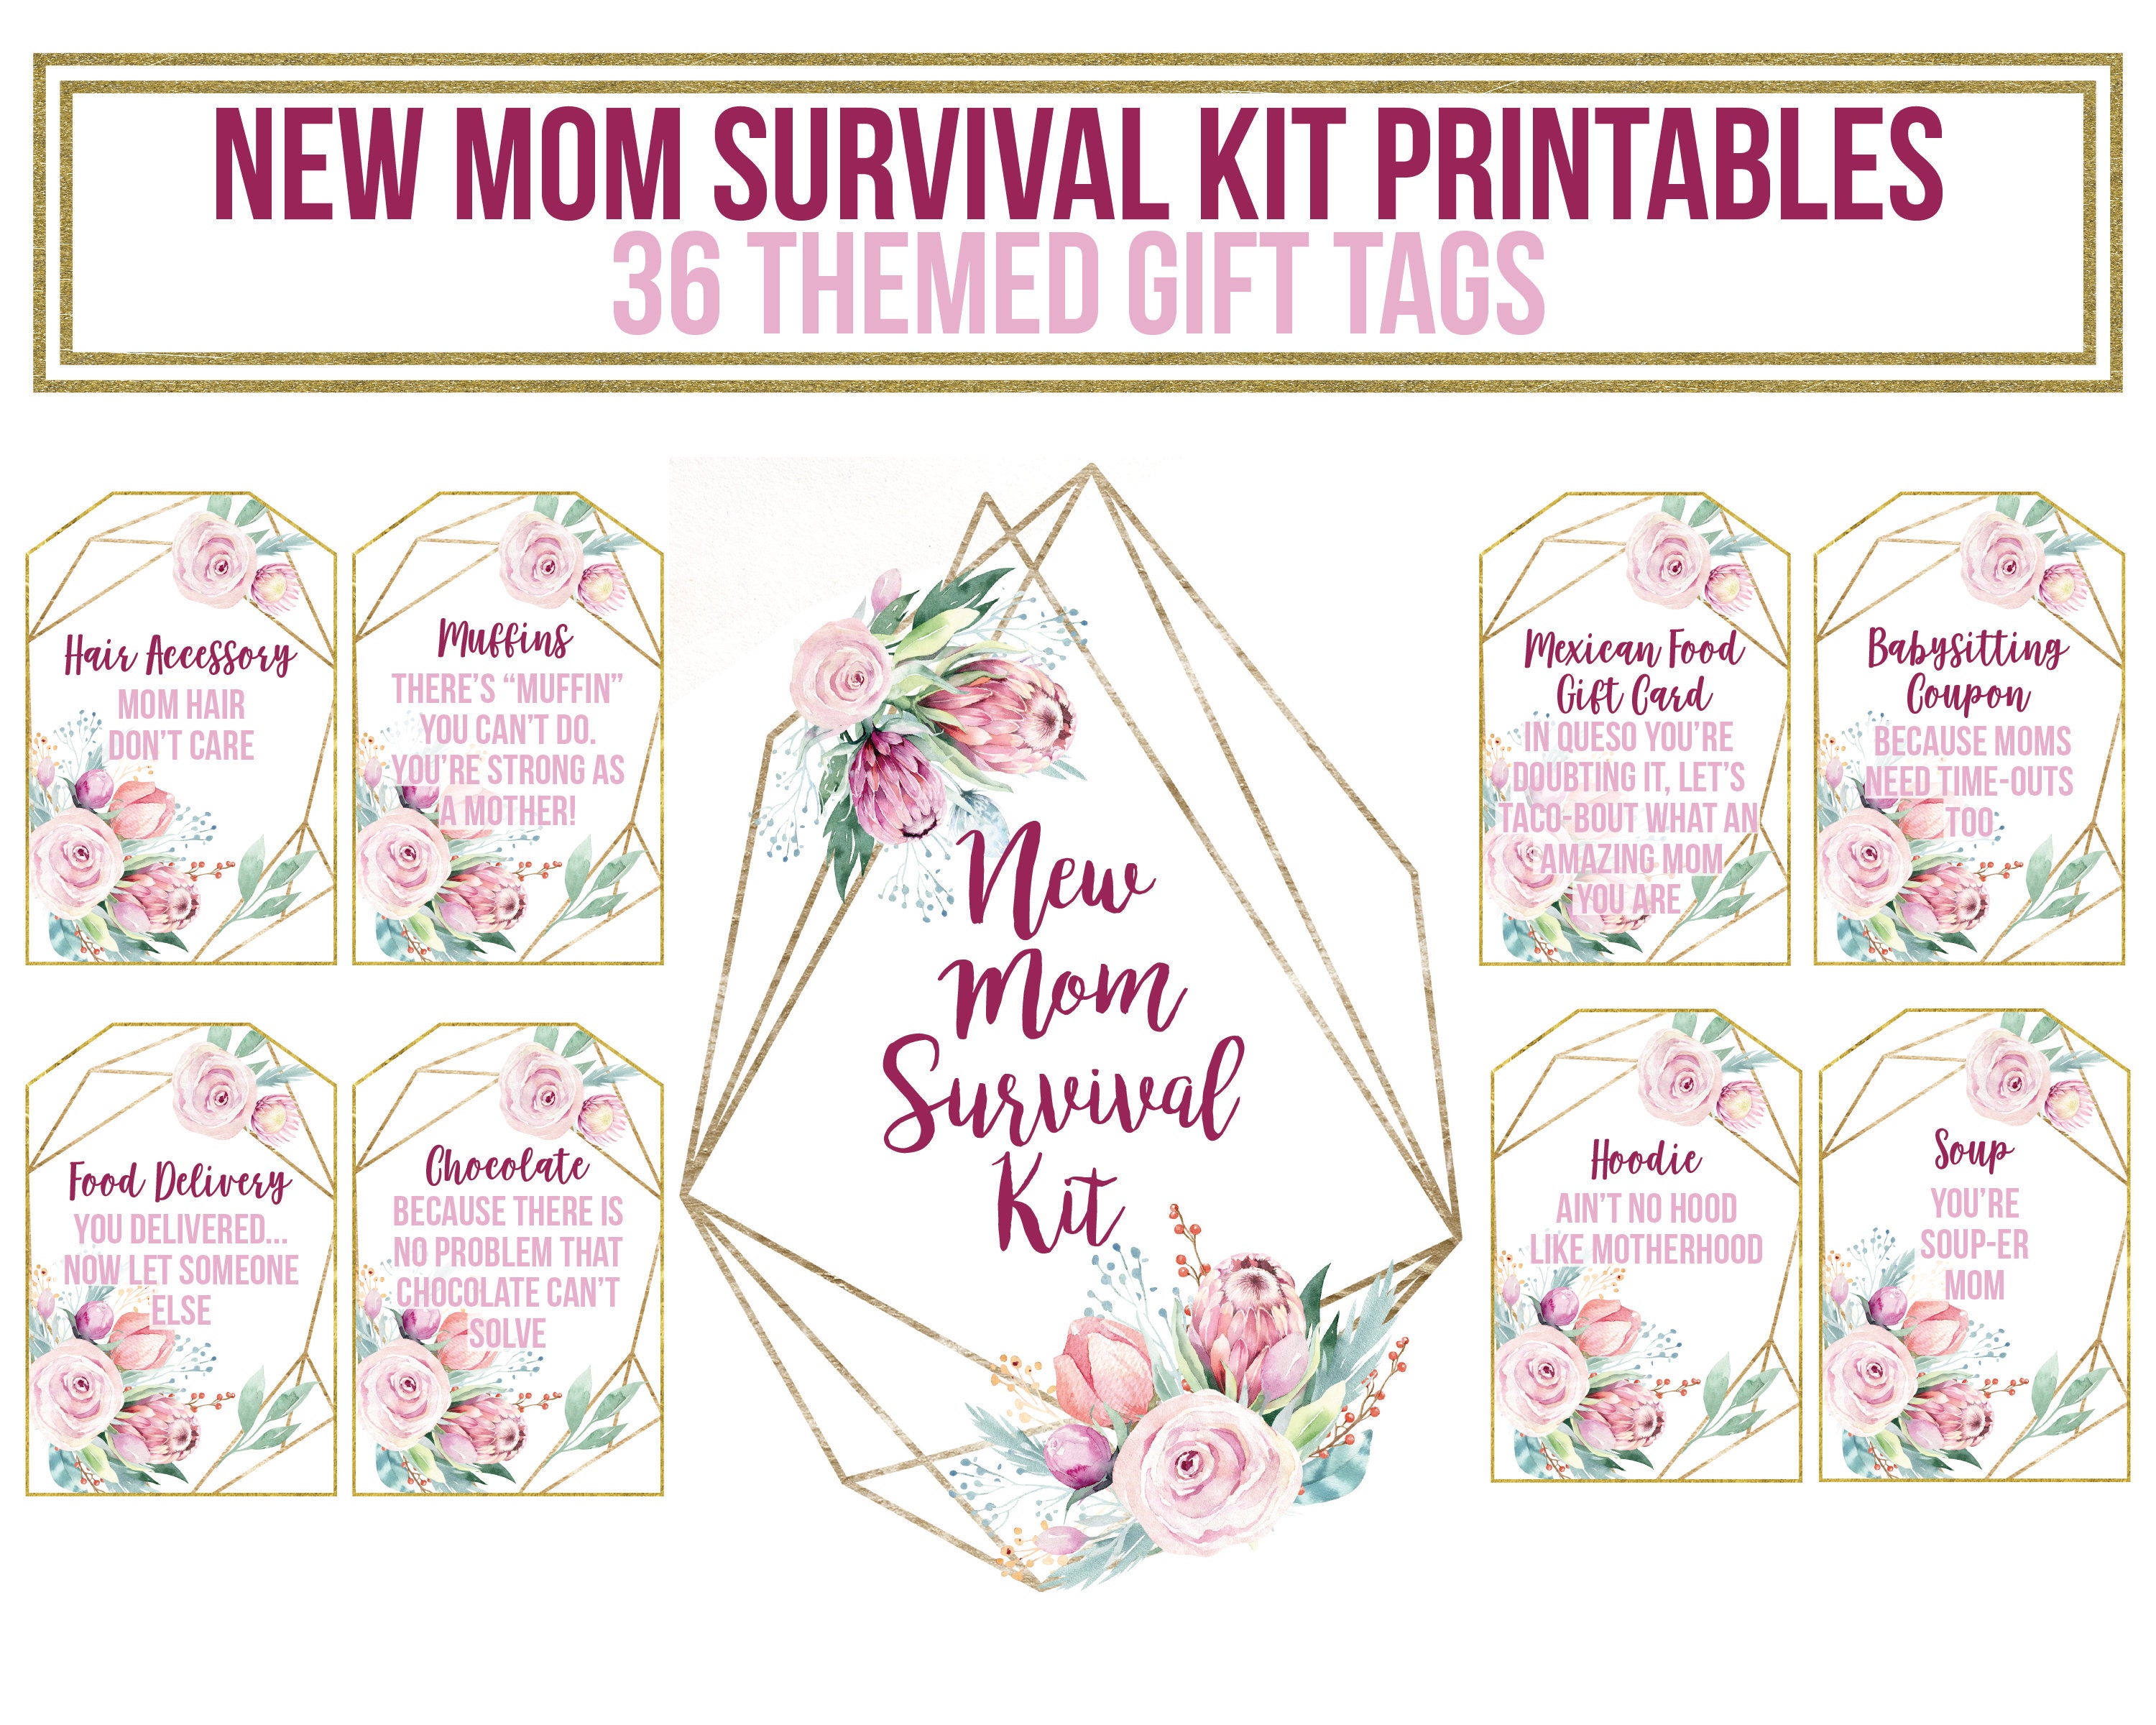 Survival Kits for New Moms - This Little Home of Mine